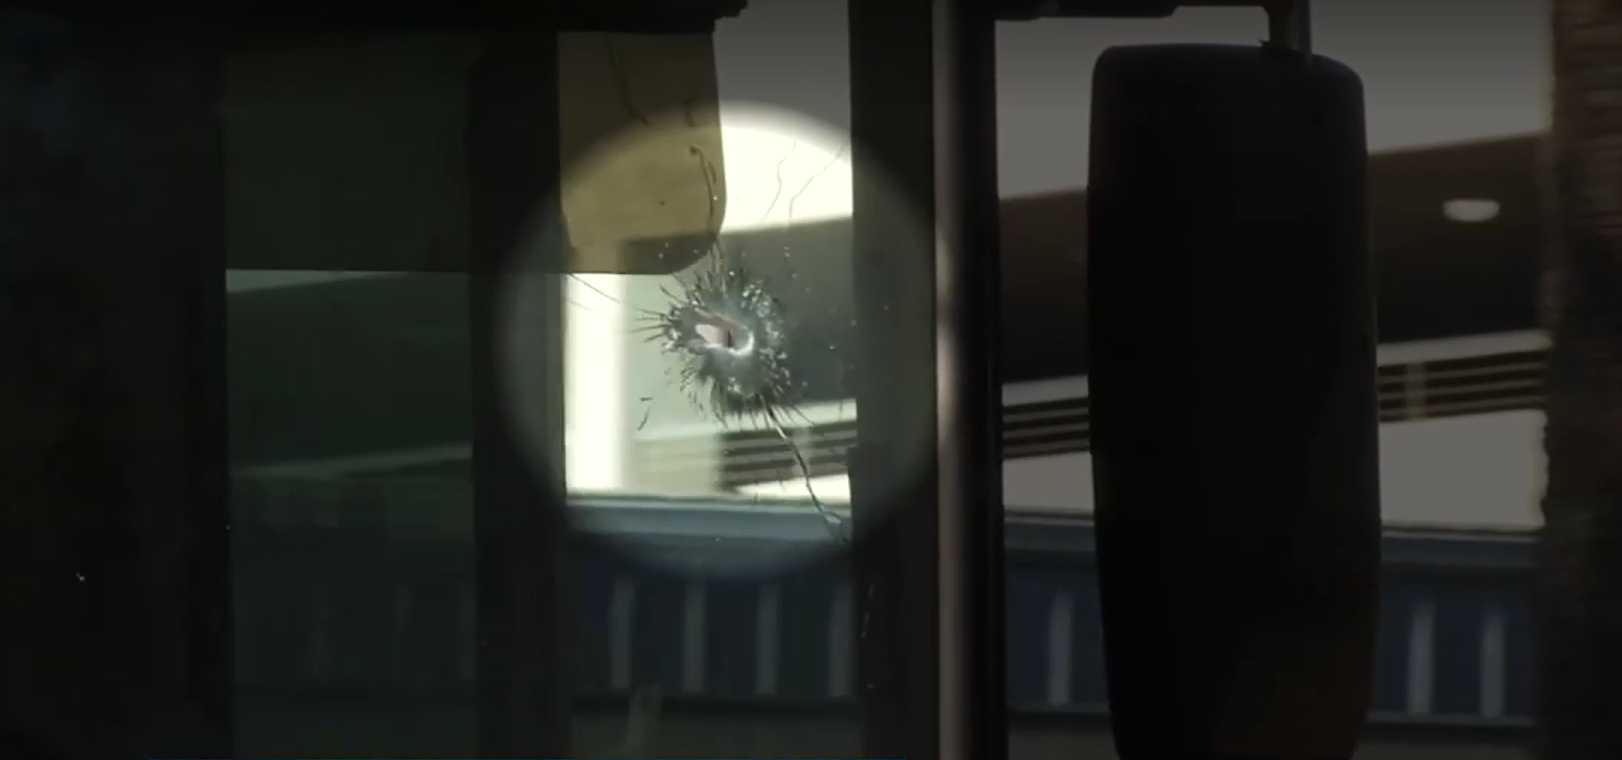 A bullet left a hole in the windshield of a school bus. | News4Jax